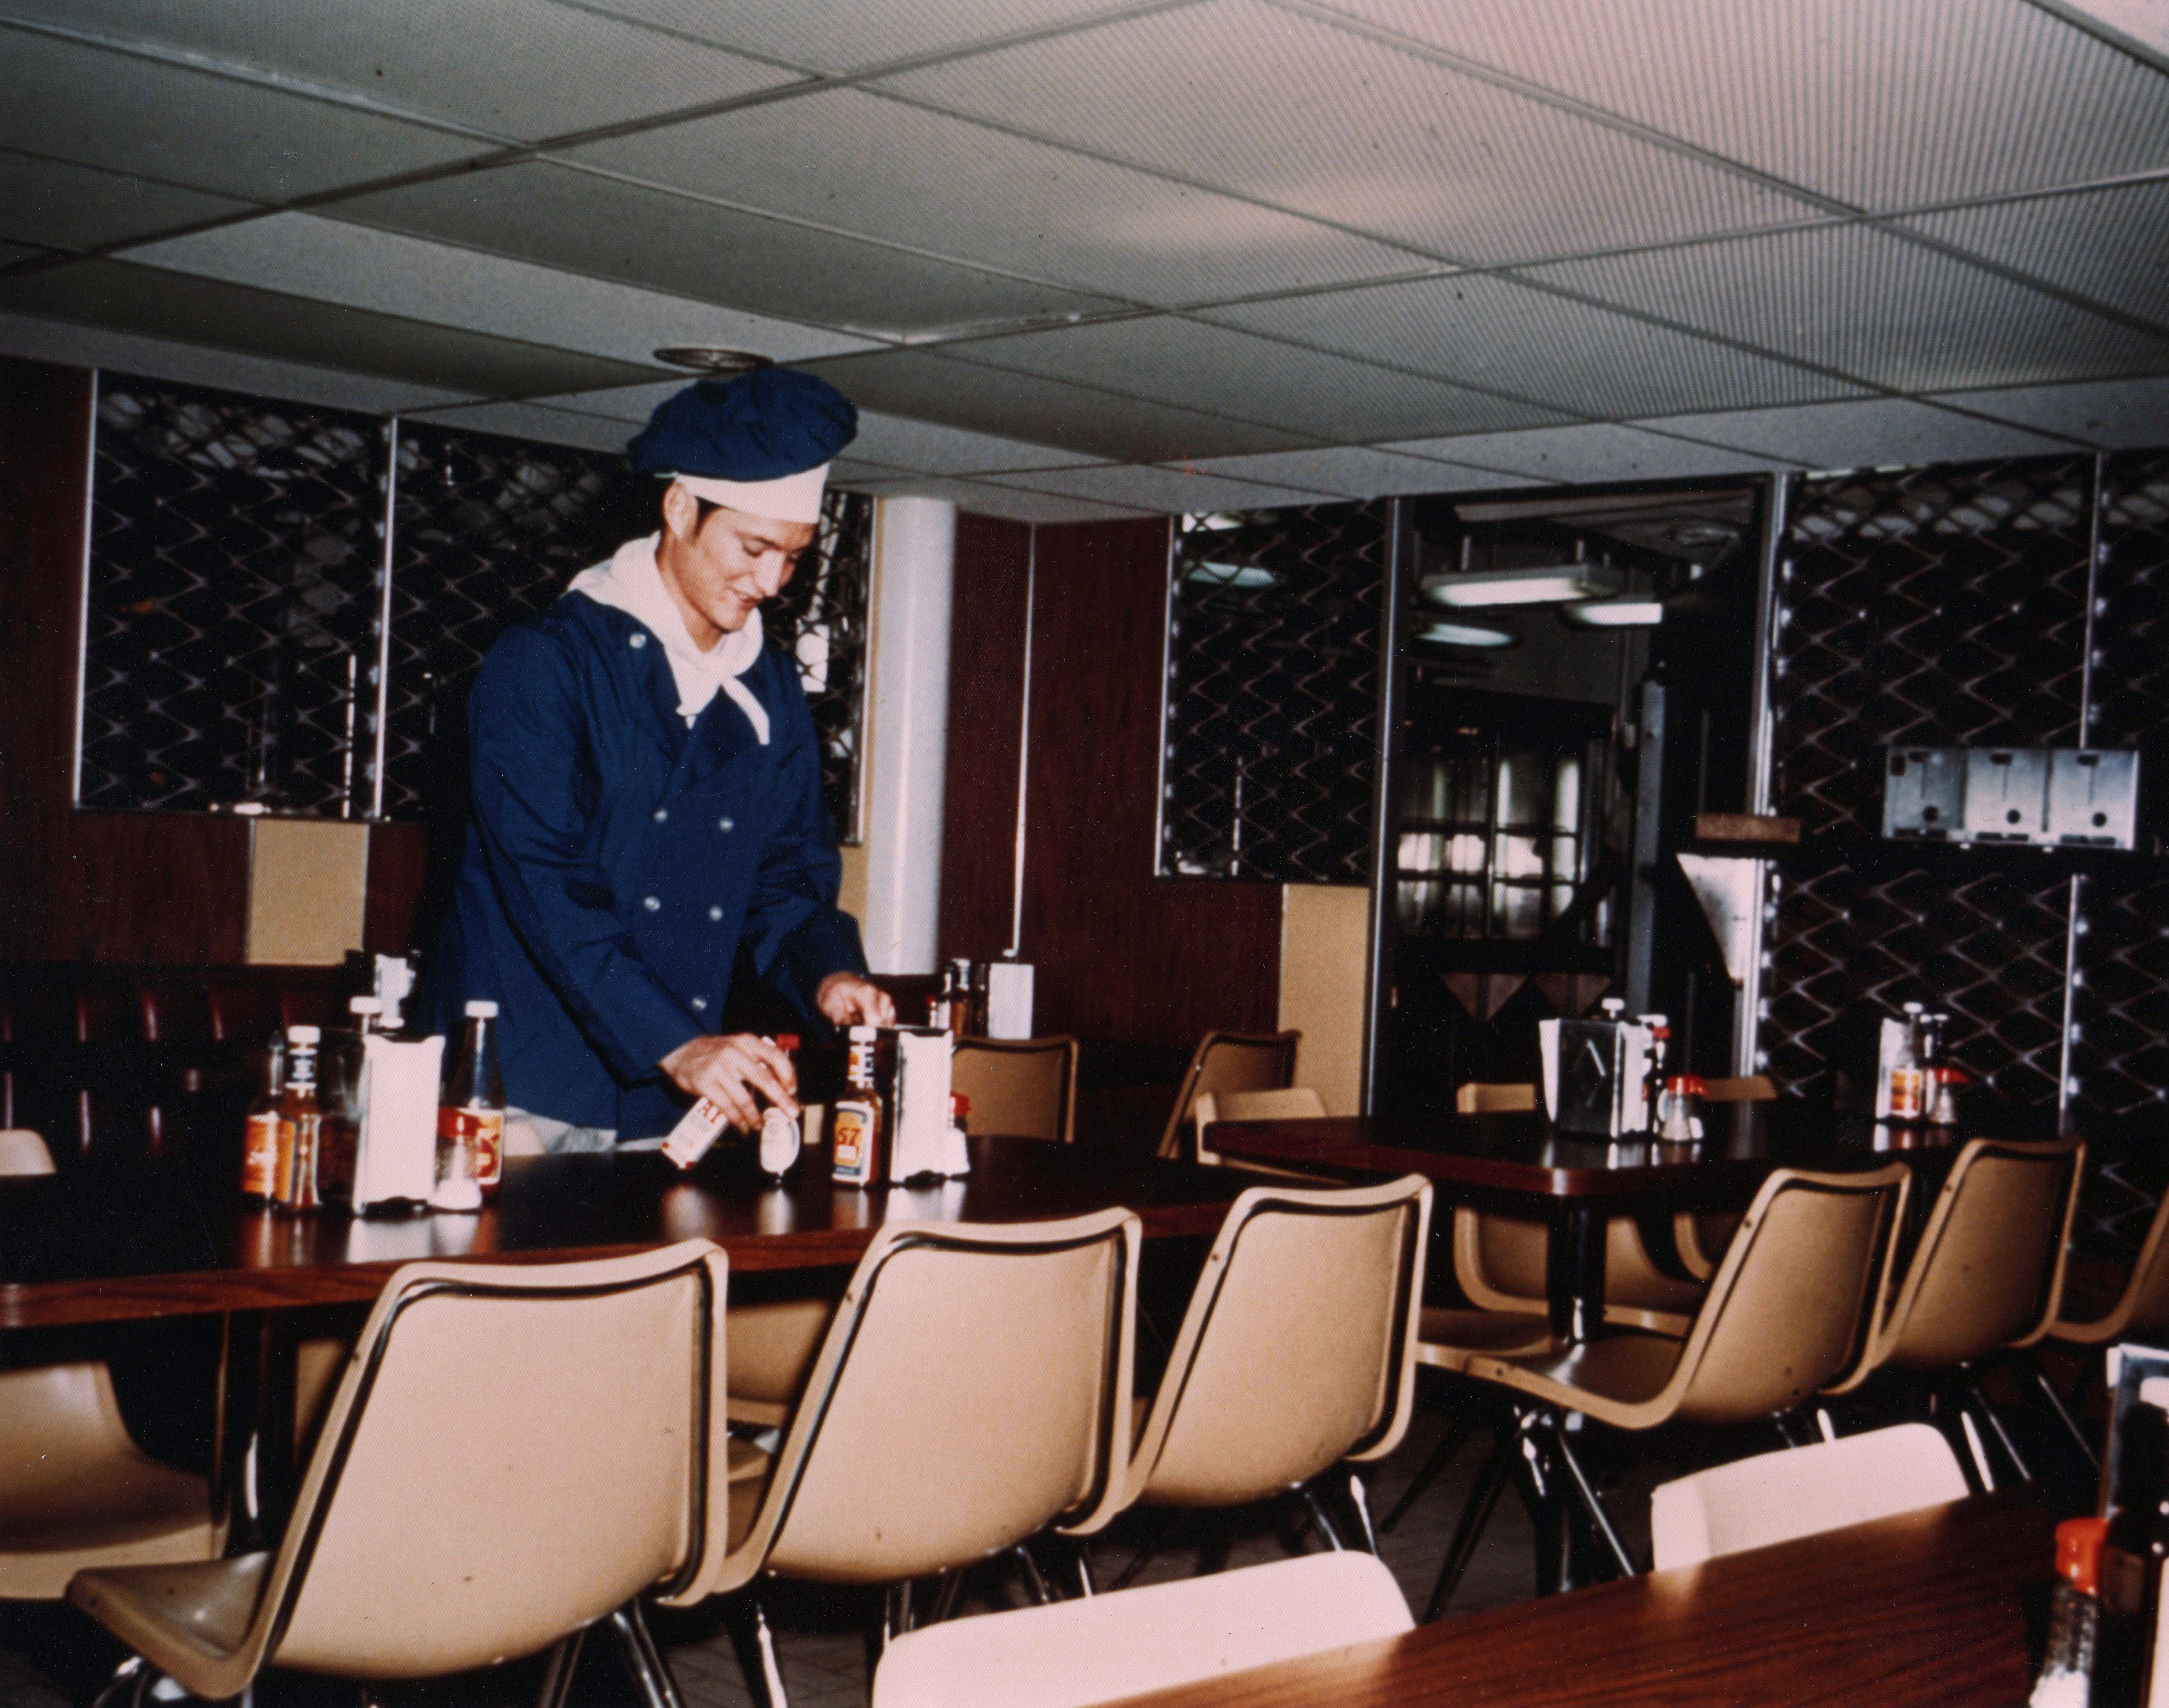 A Chief Petty Officer Mess aboard USS Proteus while at Mare Island Naval Shipyard, California, United States, Nov 1972